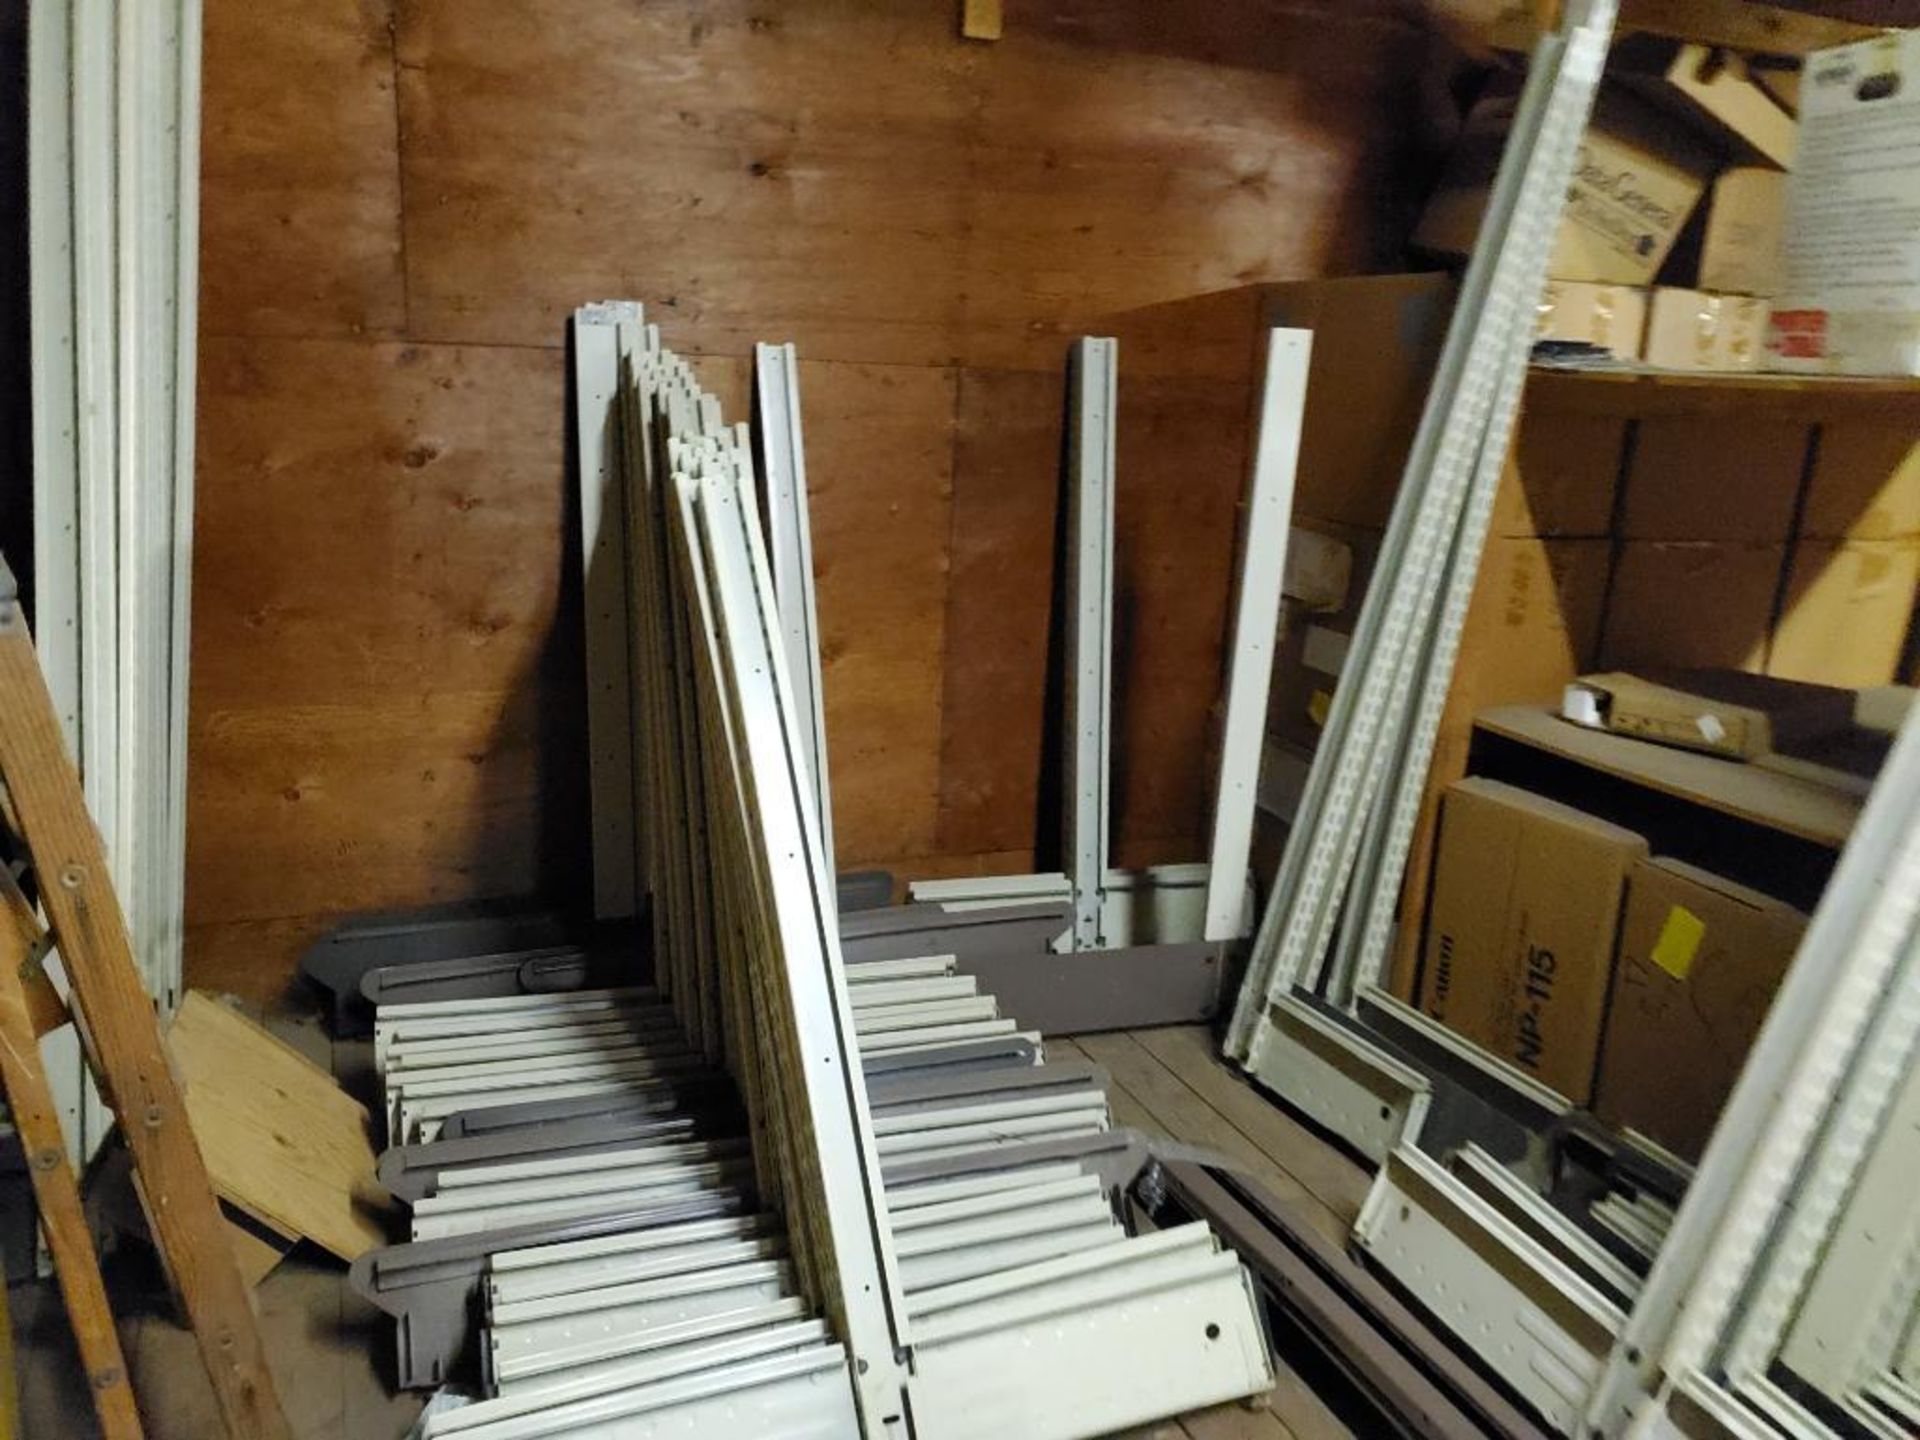 Large assortment of shelving components in attic. - Image 5 of 17